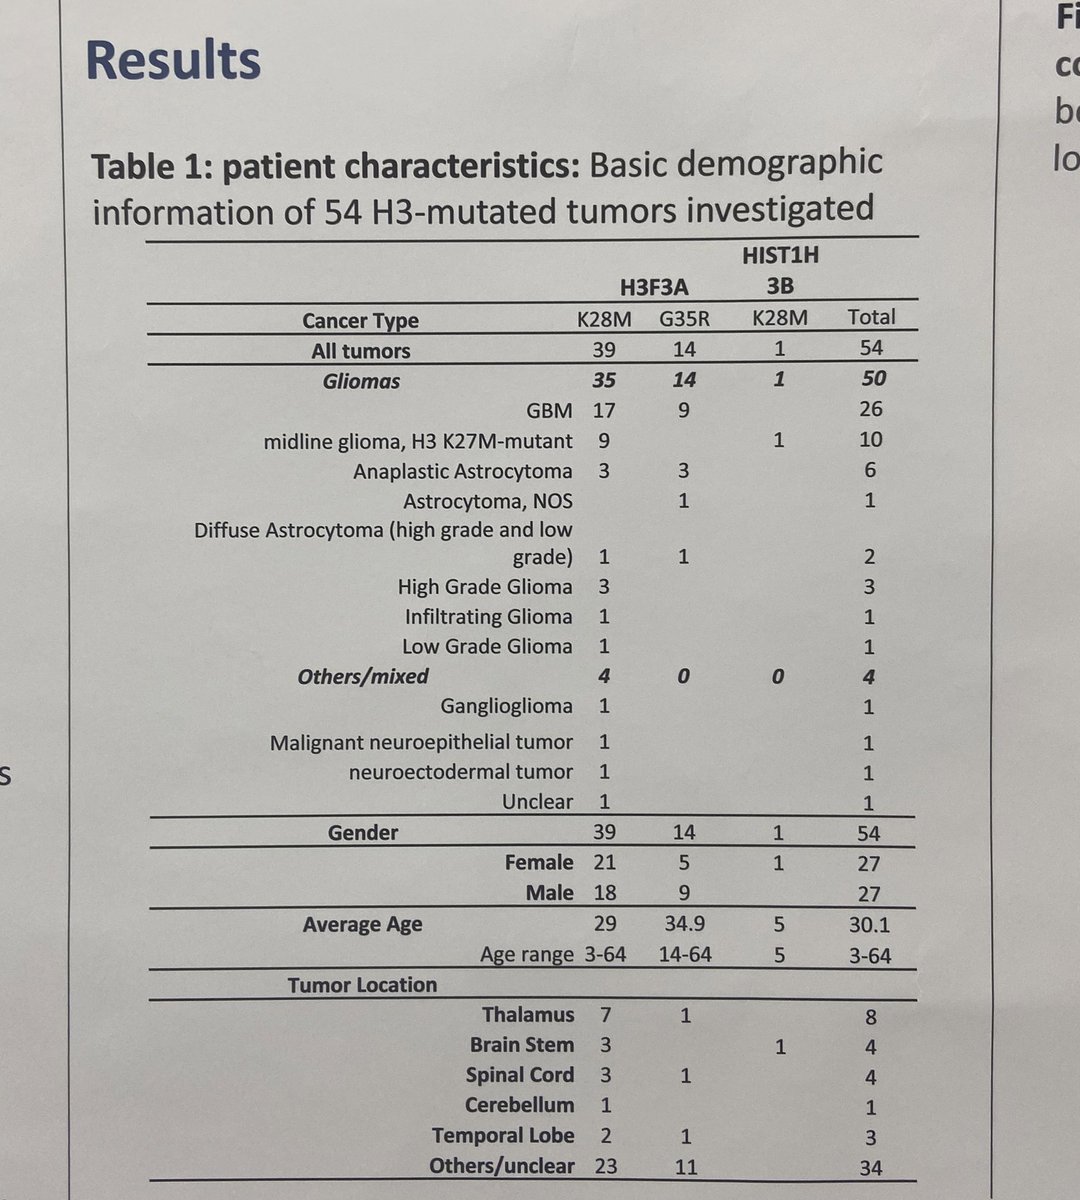 In our cohort, there were pts with midline tumors, as well as temporal lobe and cerebellar lesions. (Too many unknowns, but we’re examining that)